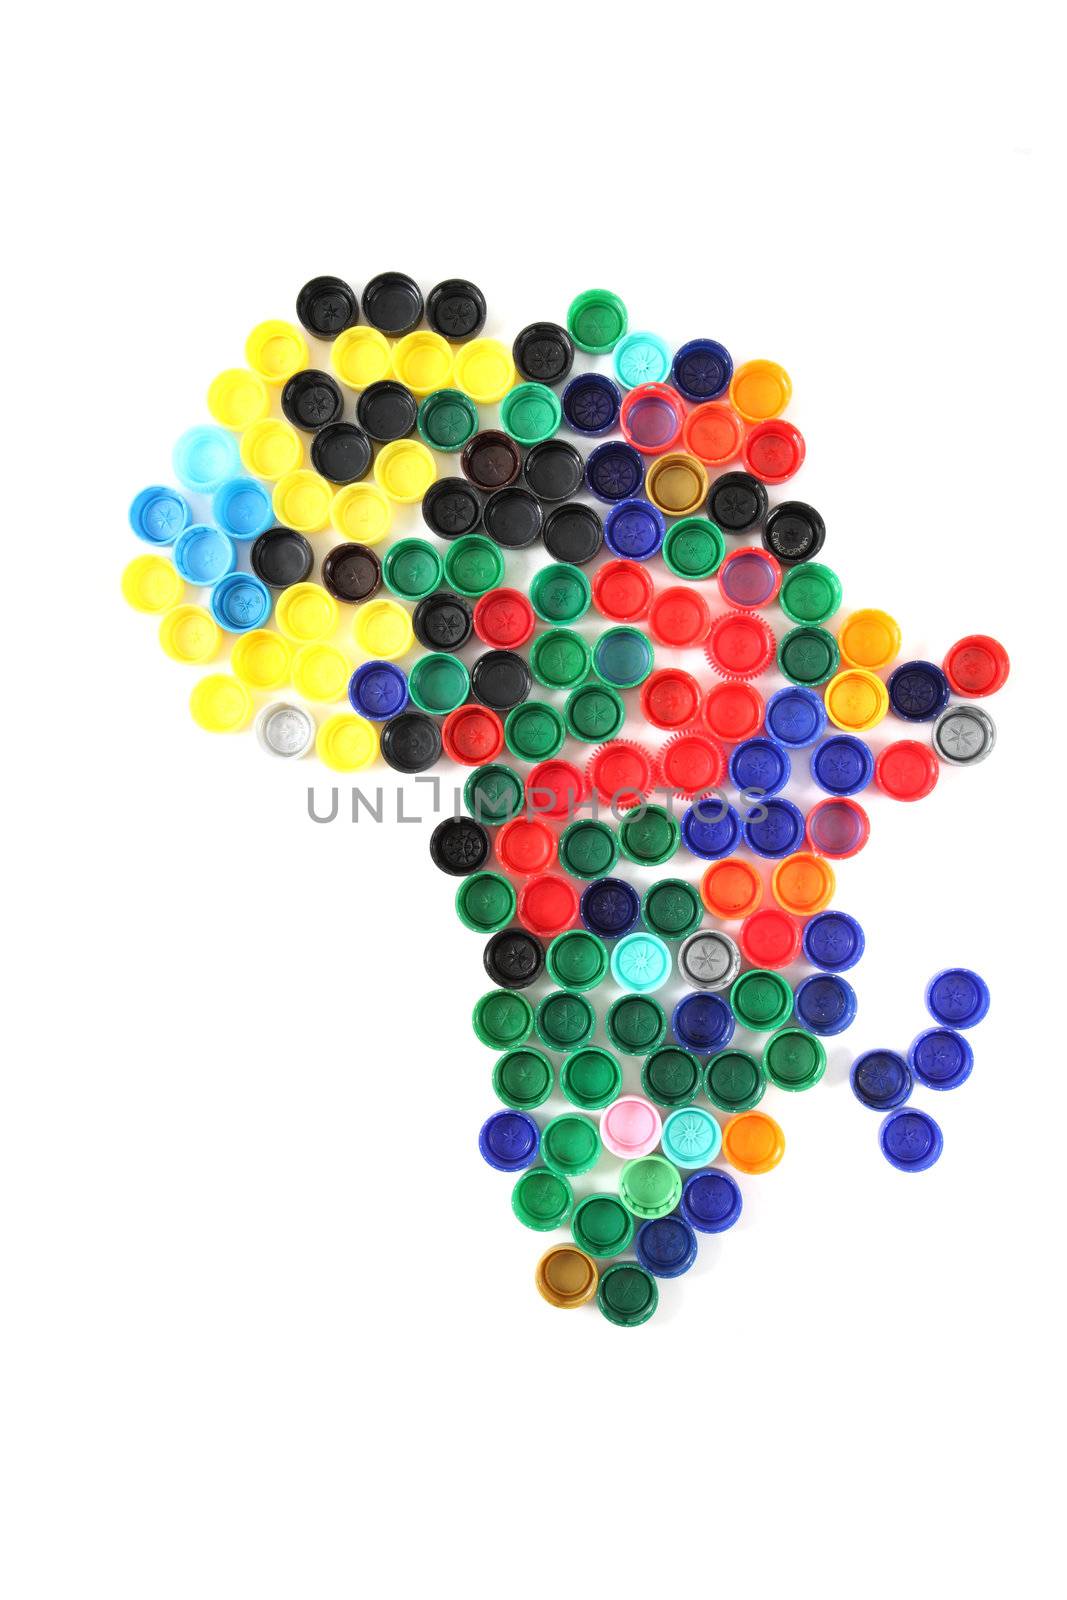 africa from the color caps by jonnysek